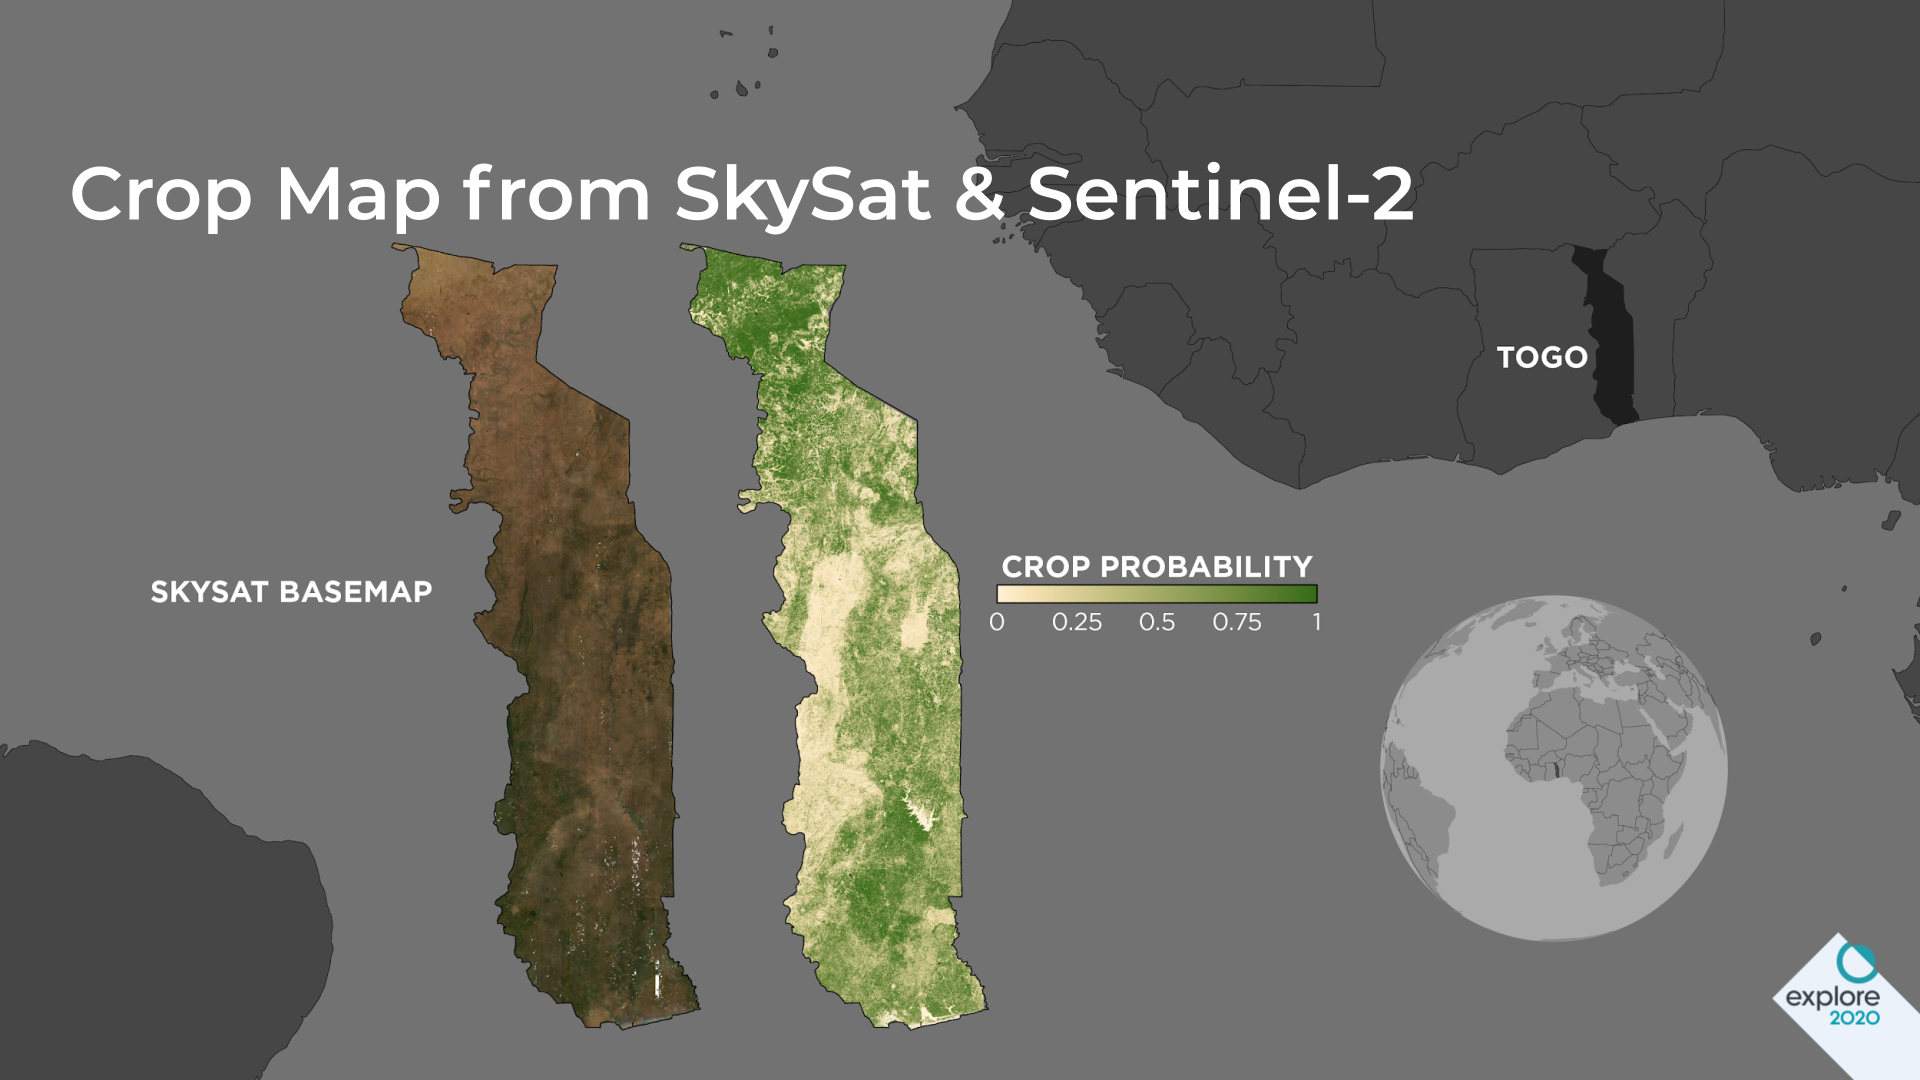 Country-wide cropland probability map and Planet's SkySat Basemap.